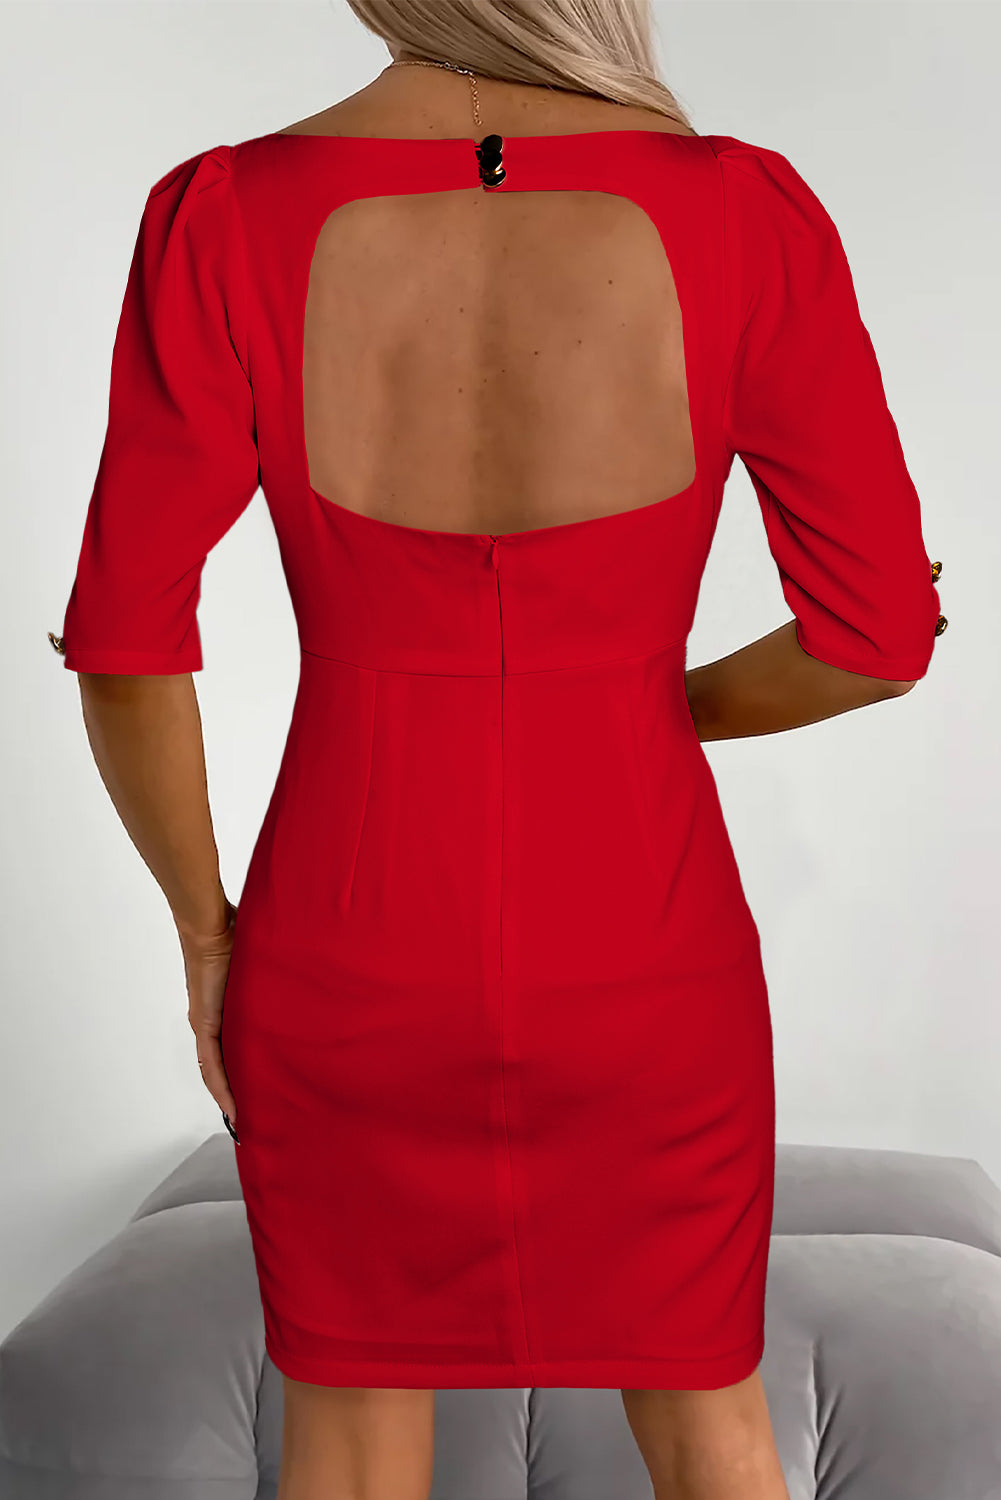 Red Square Neck Backless Bodycon Dress